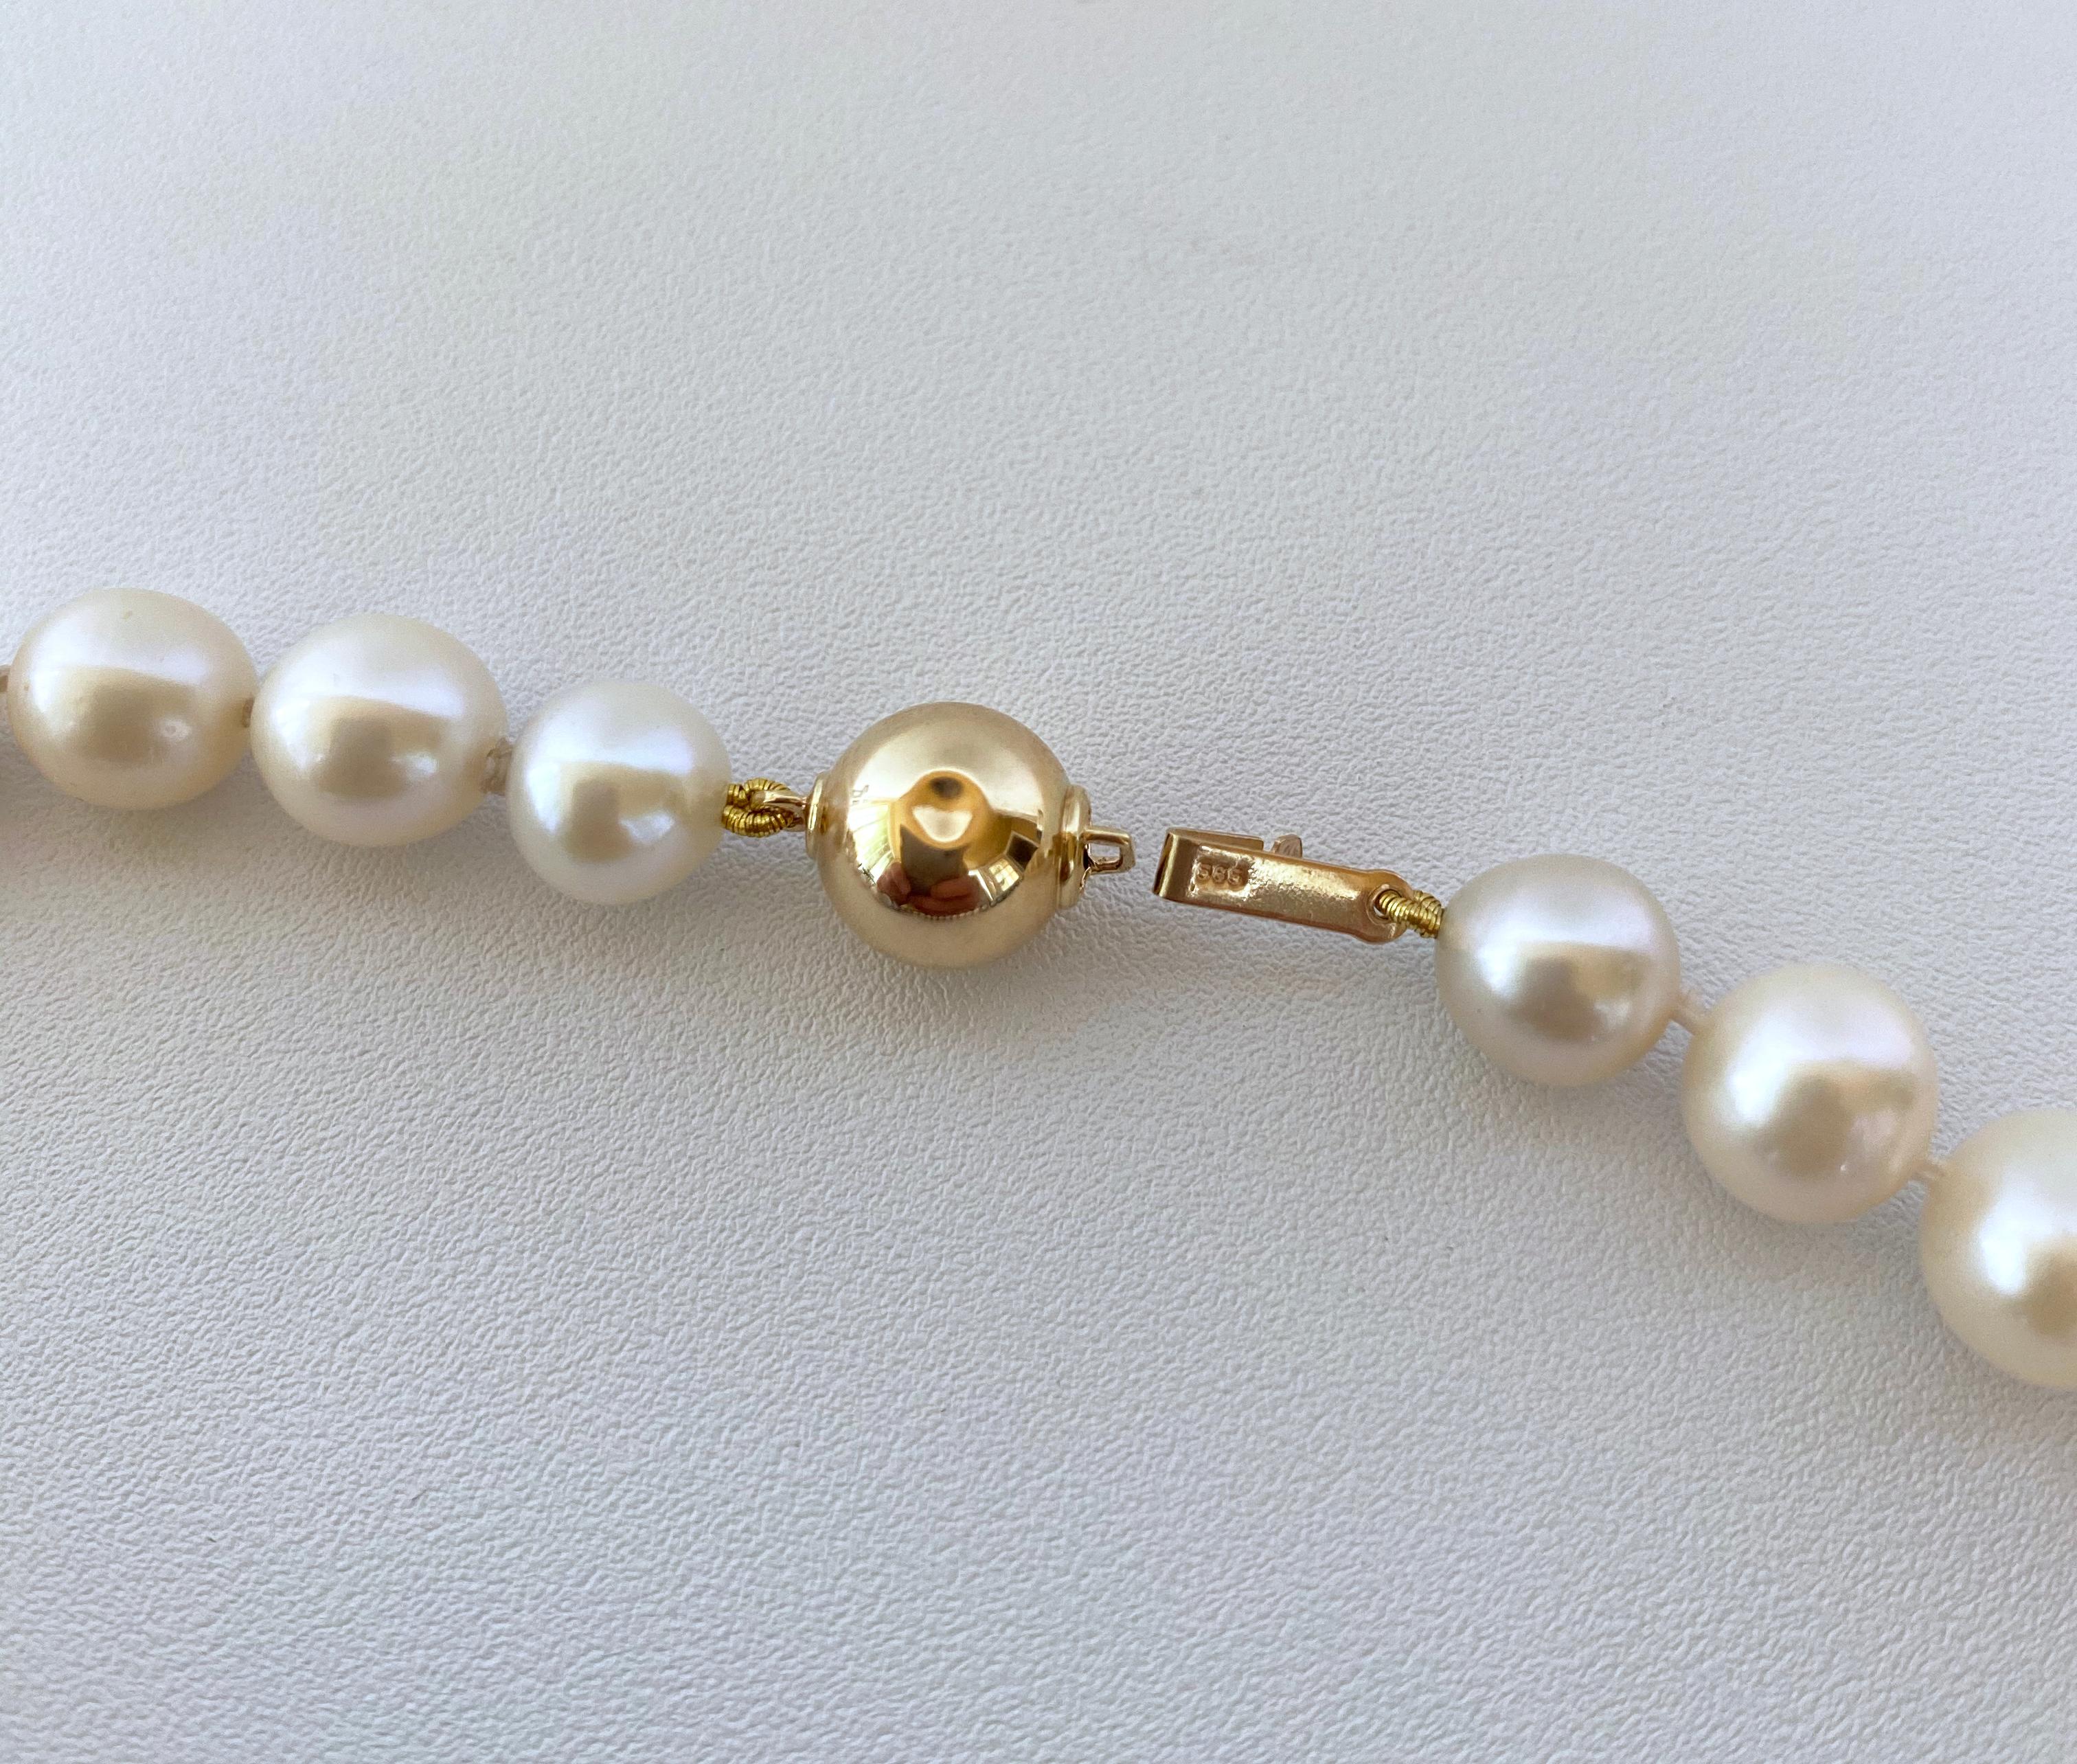 Bead Marina J. All Pearl Ombre Necklace with 14k Yellow Gold Clasp